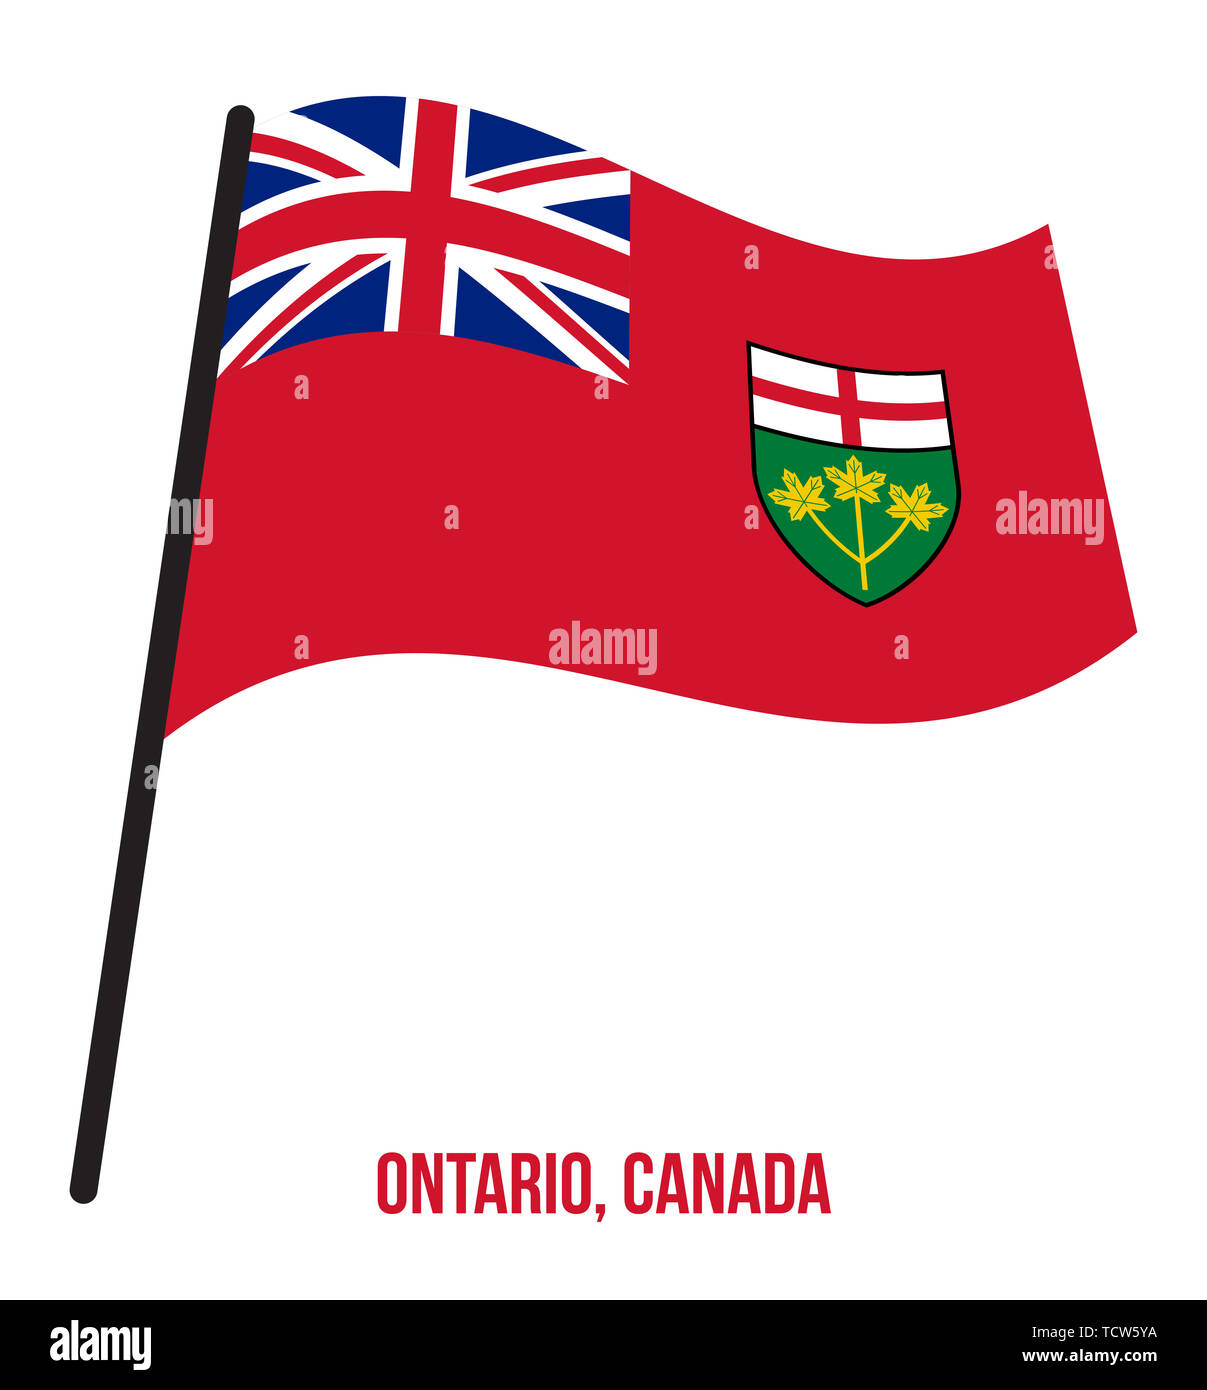 Ontario Flag Waving Vector Illustration on White Background. Provinces Flag of Canada. Correct Size, Proportion and Colors. Stock Photo